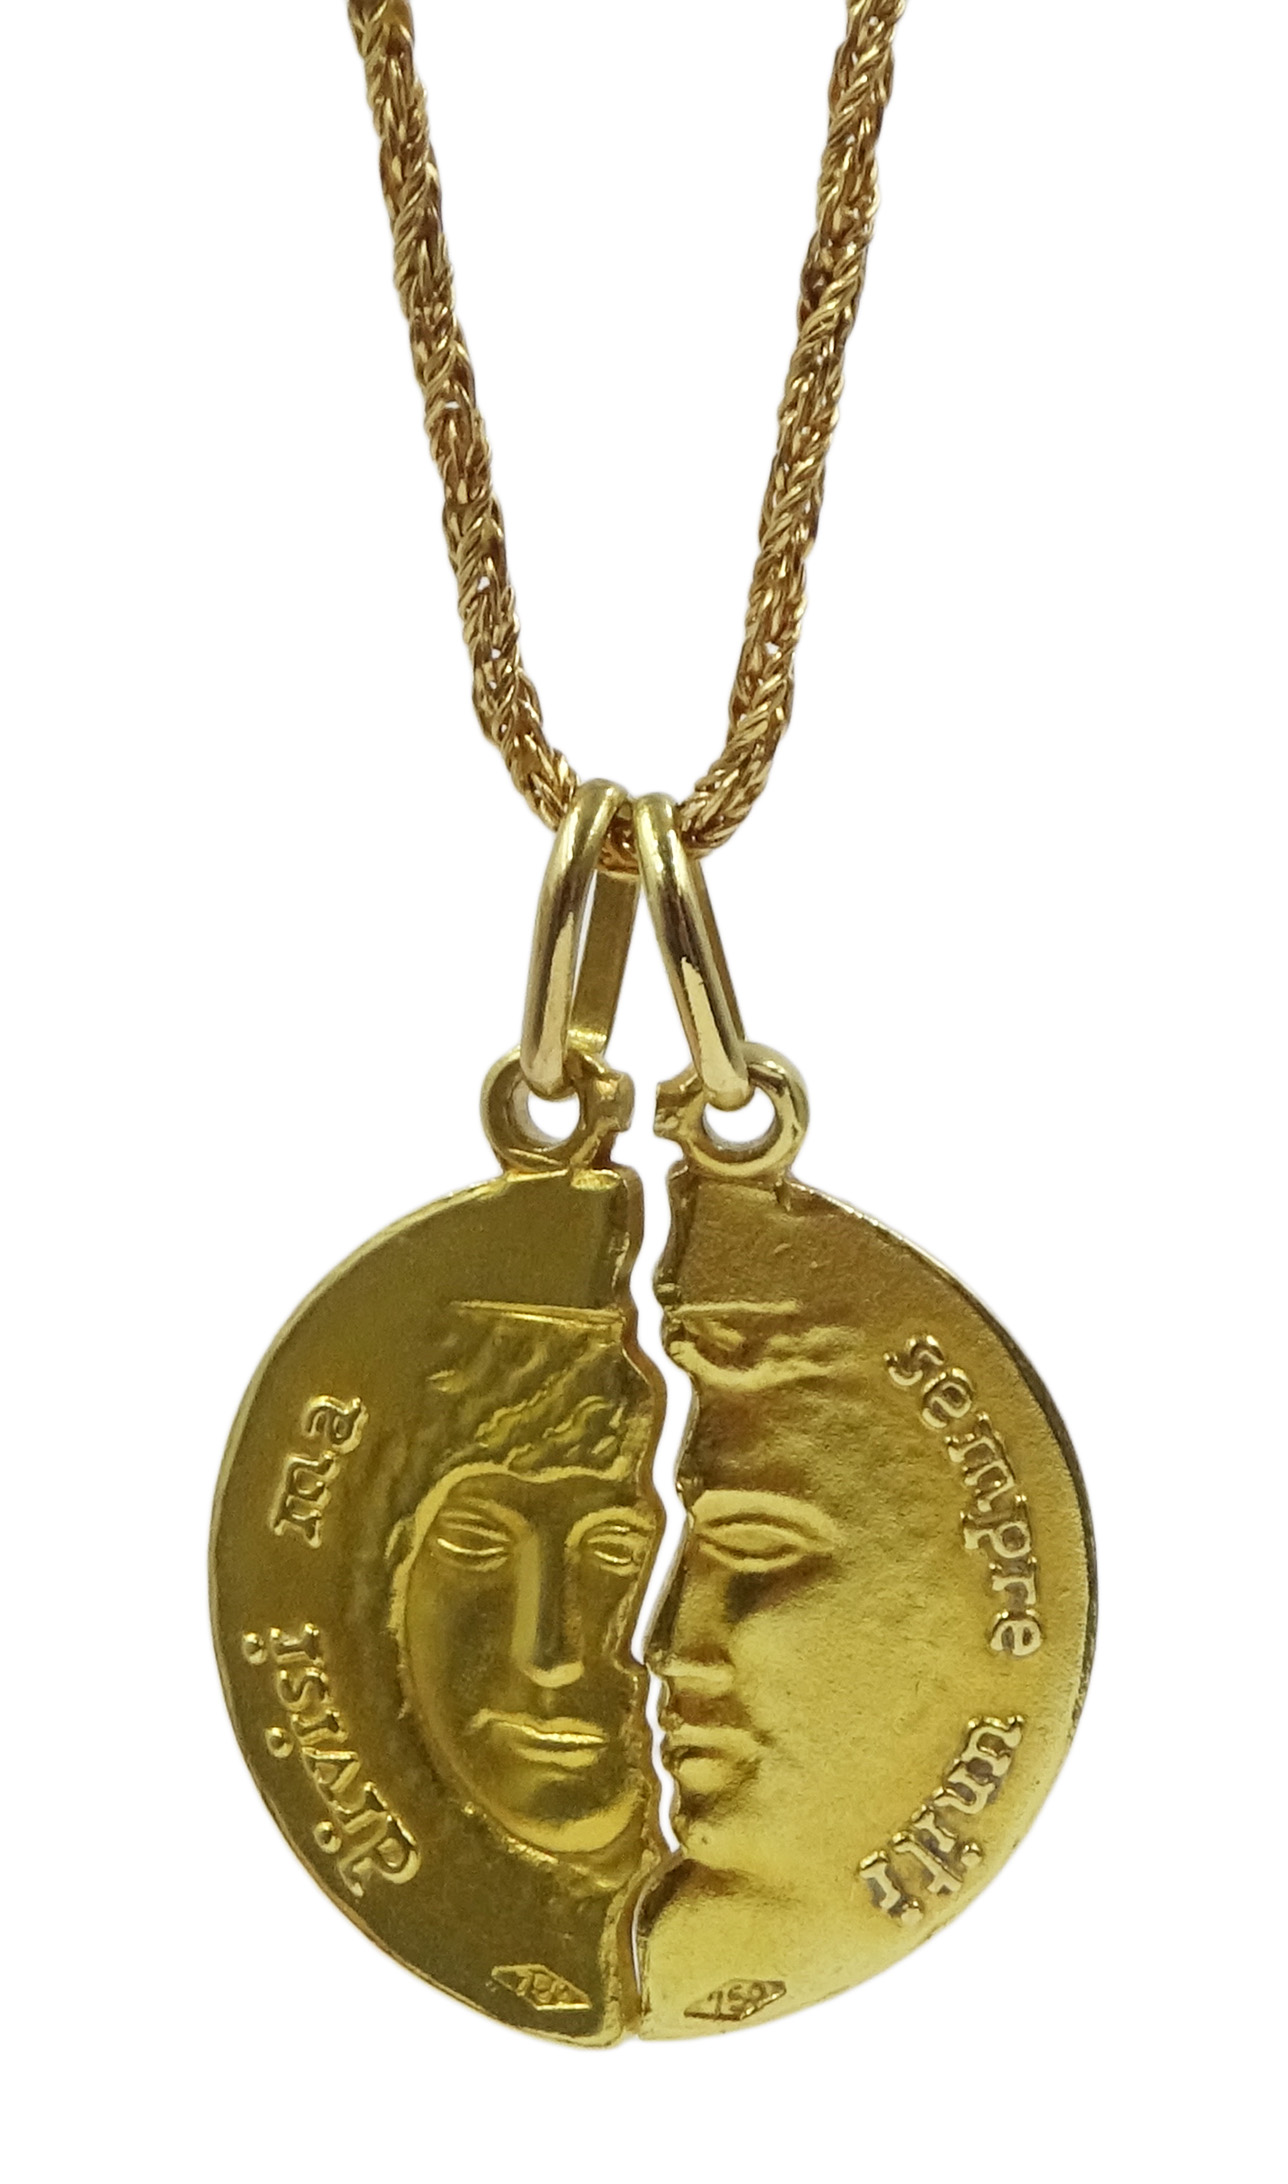 18ct gold moon love token on 18ct gold Singapore chain necklace, both stamped 750